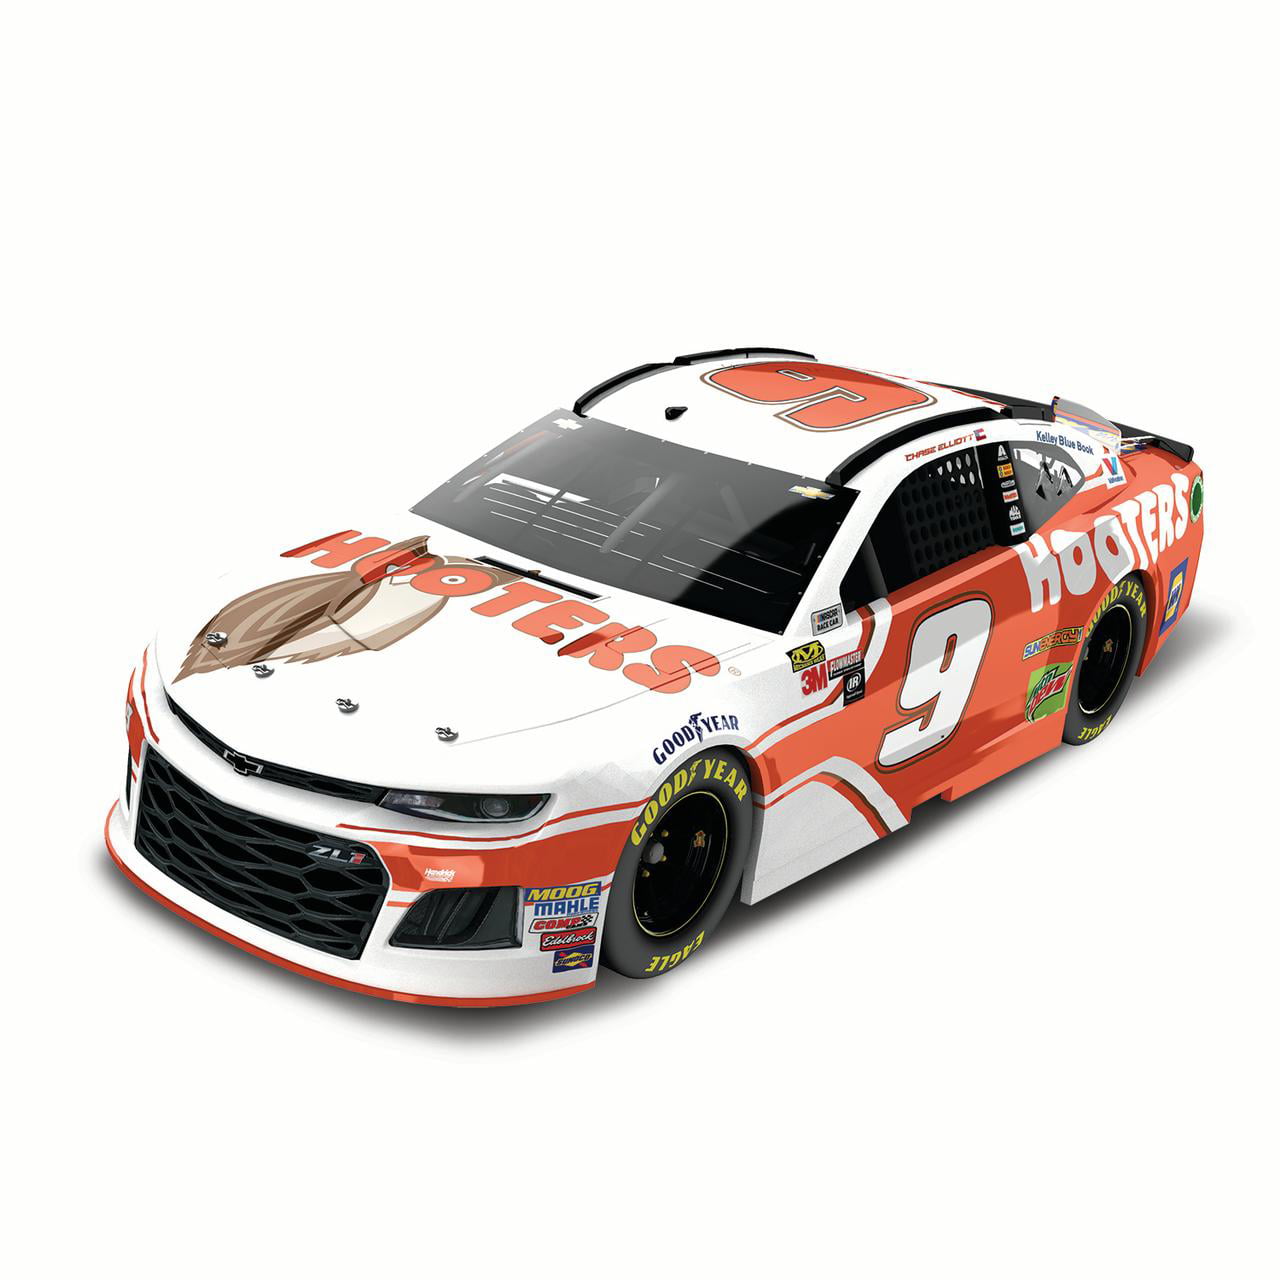 Details about   2017 Chase Elliott Hooters 1:64 scale car 